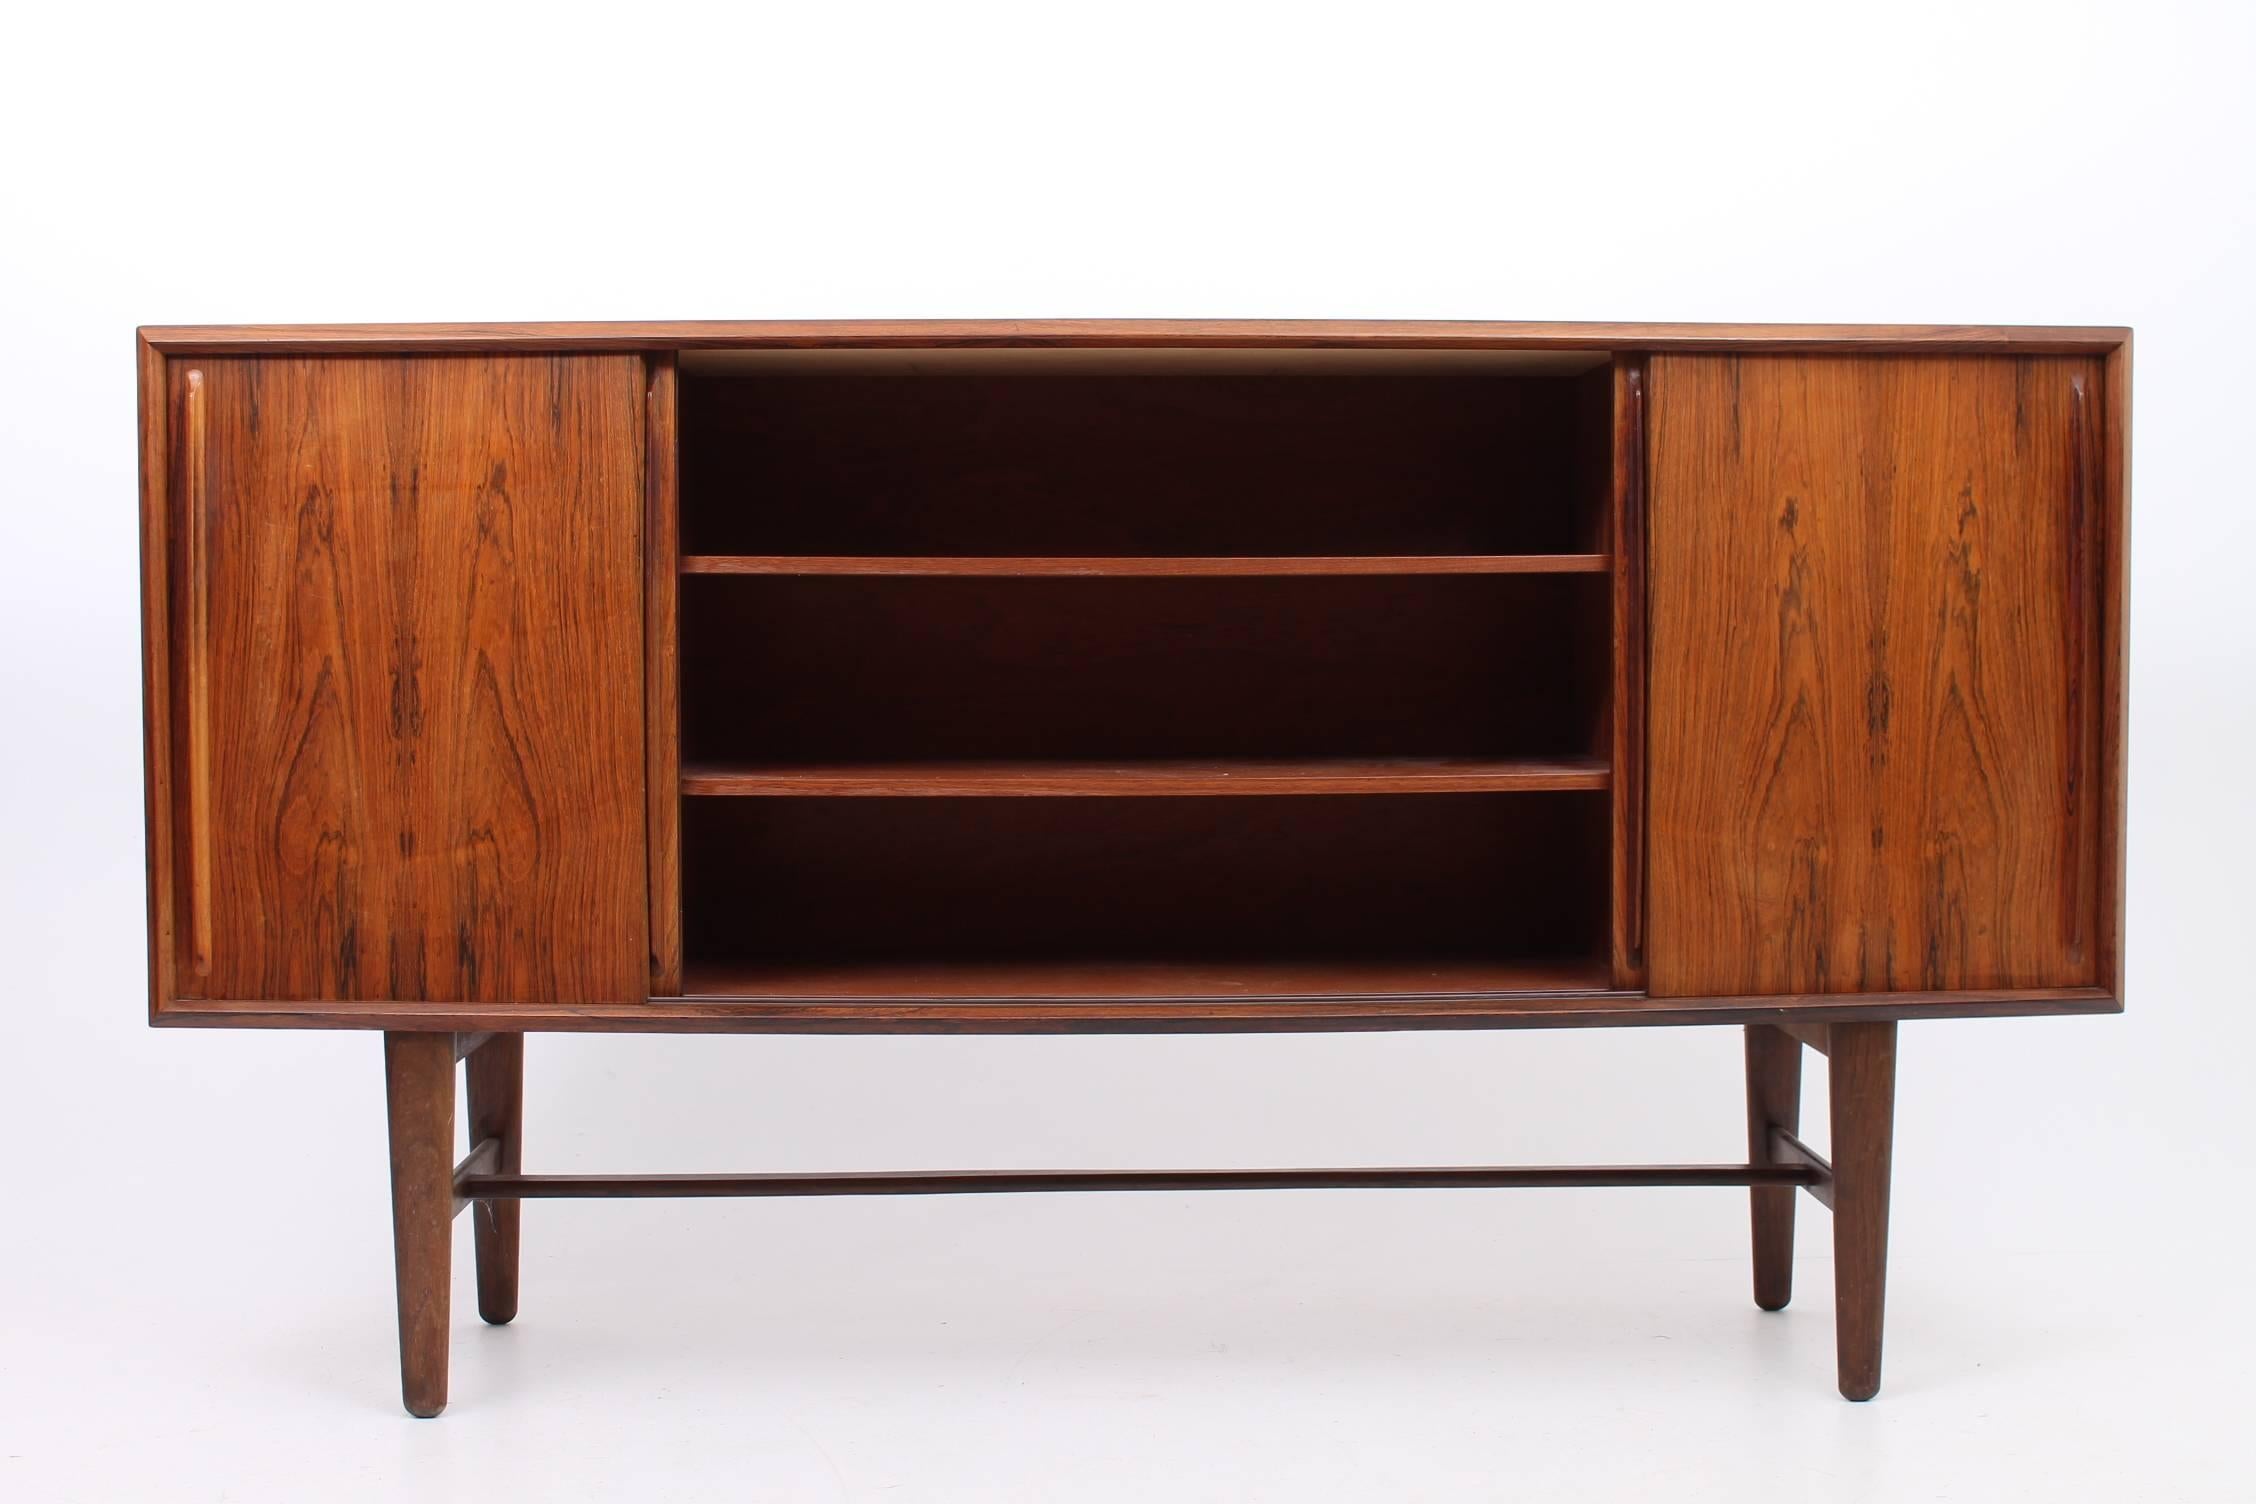 Gorgeous rosewood credenza designed by Henry Rosengren Hansen for Brande Møbler. The credenza has four opening doors - the middle section is larger with two adjustable shelves. The left side compartment has drawers and the right has more adjustable